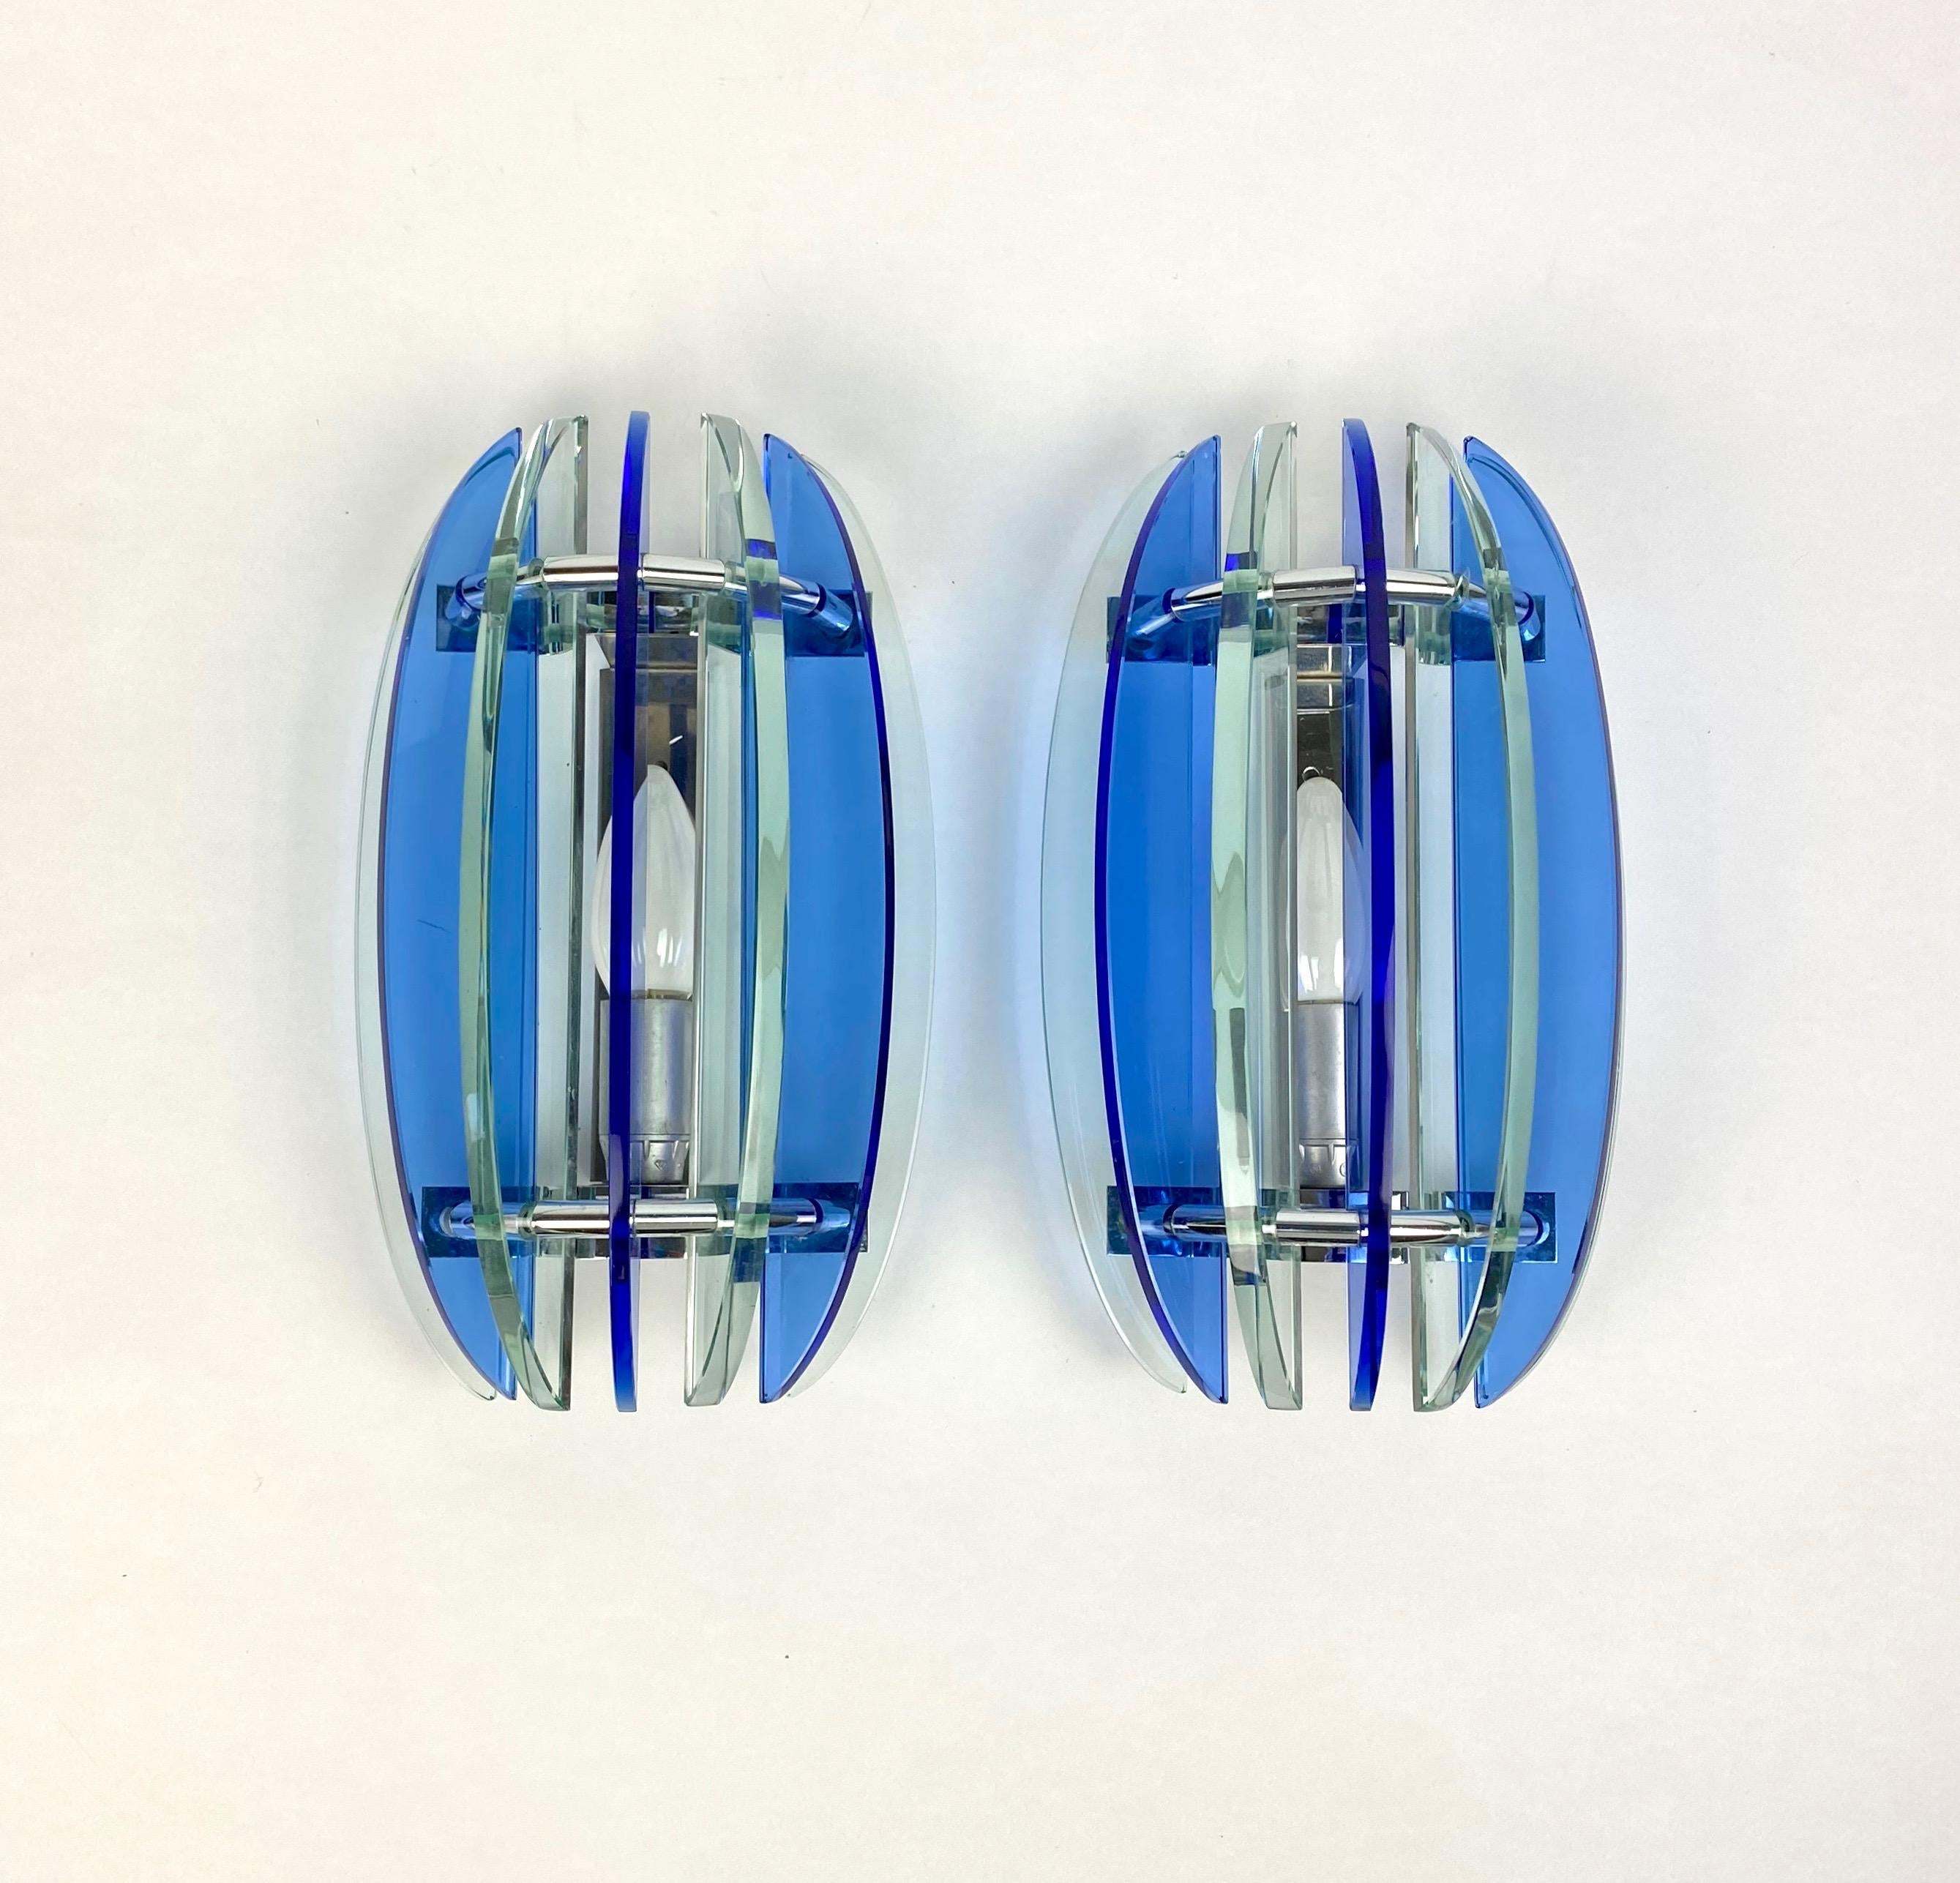 Pair of wall sconces in colored glass (blue and green) and chrome by Veca, Italy, 1970s. The original label is still attached.